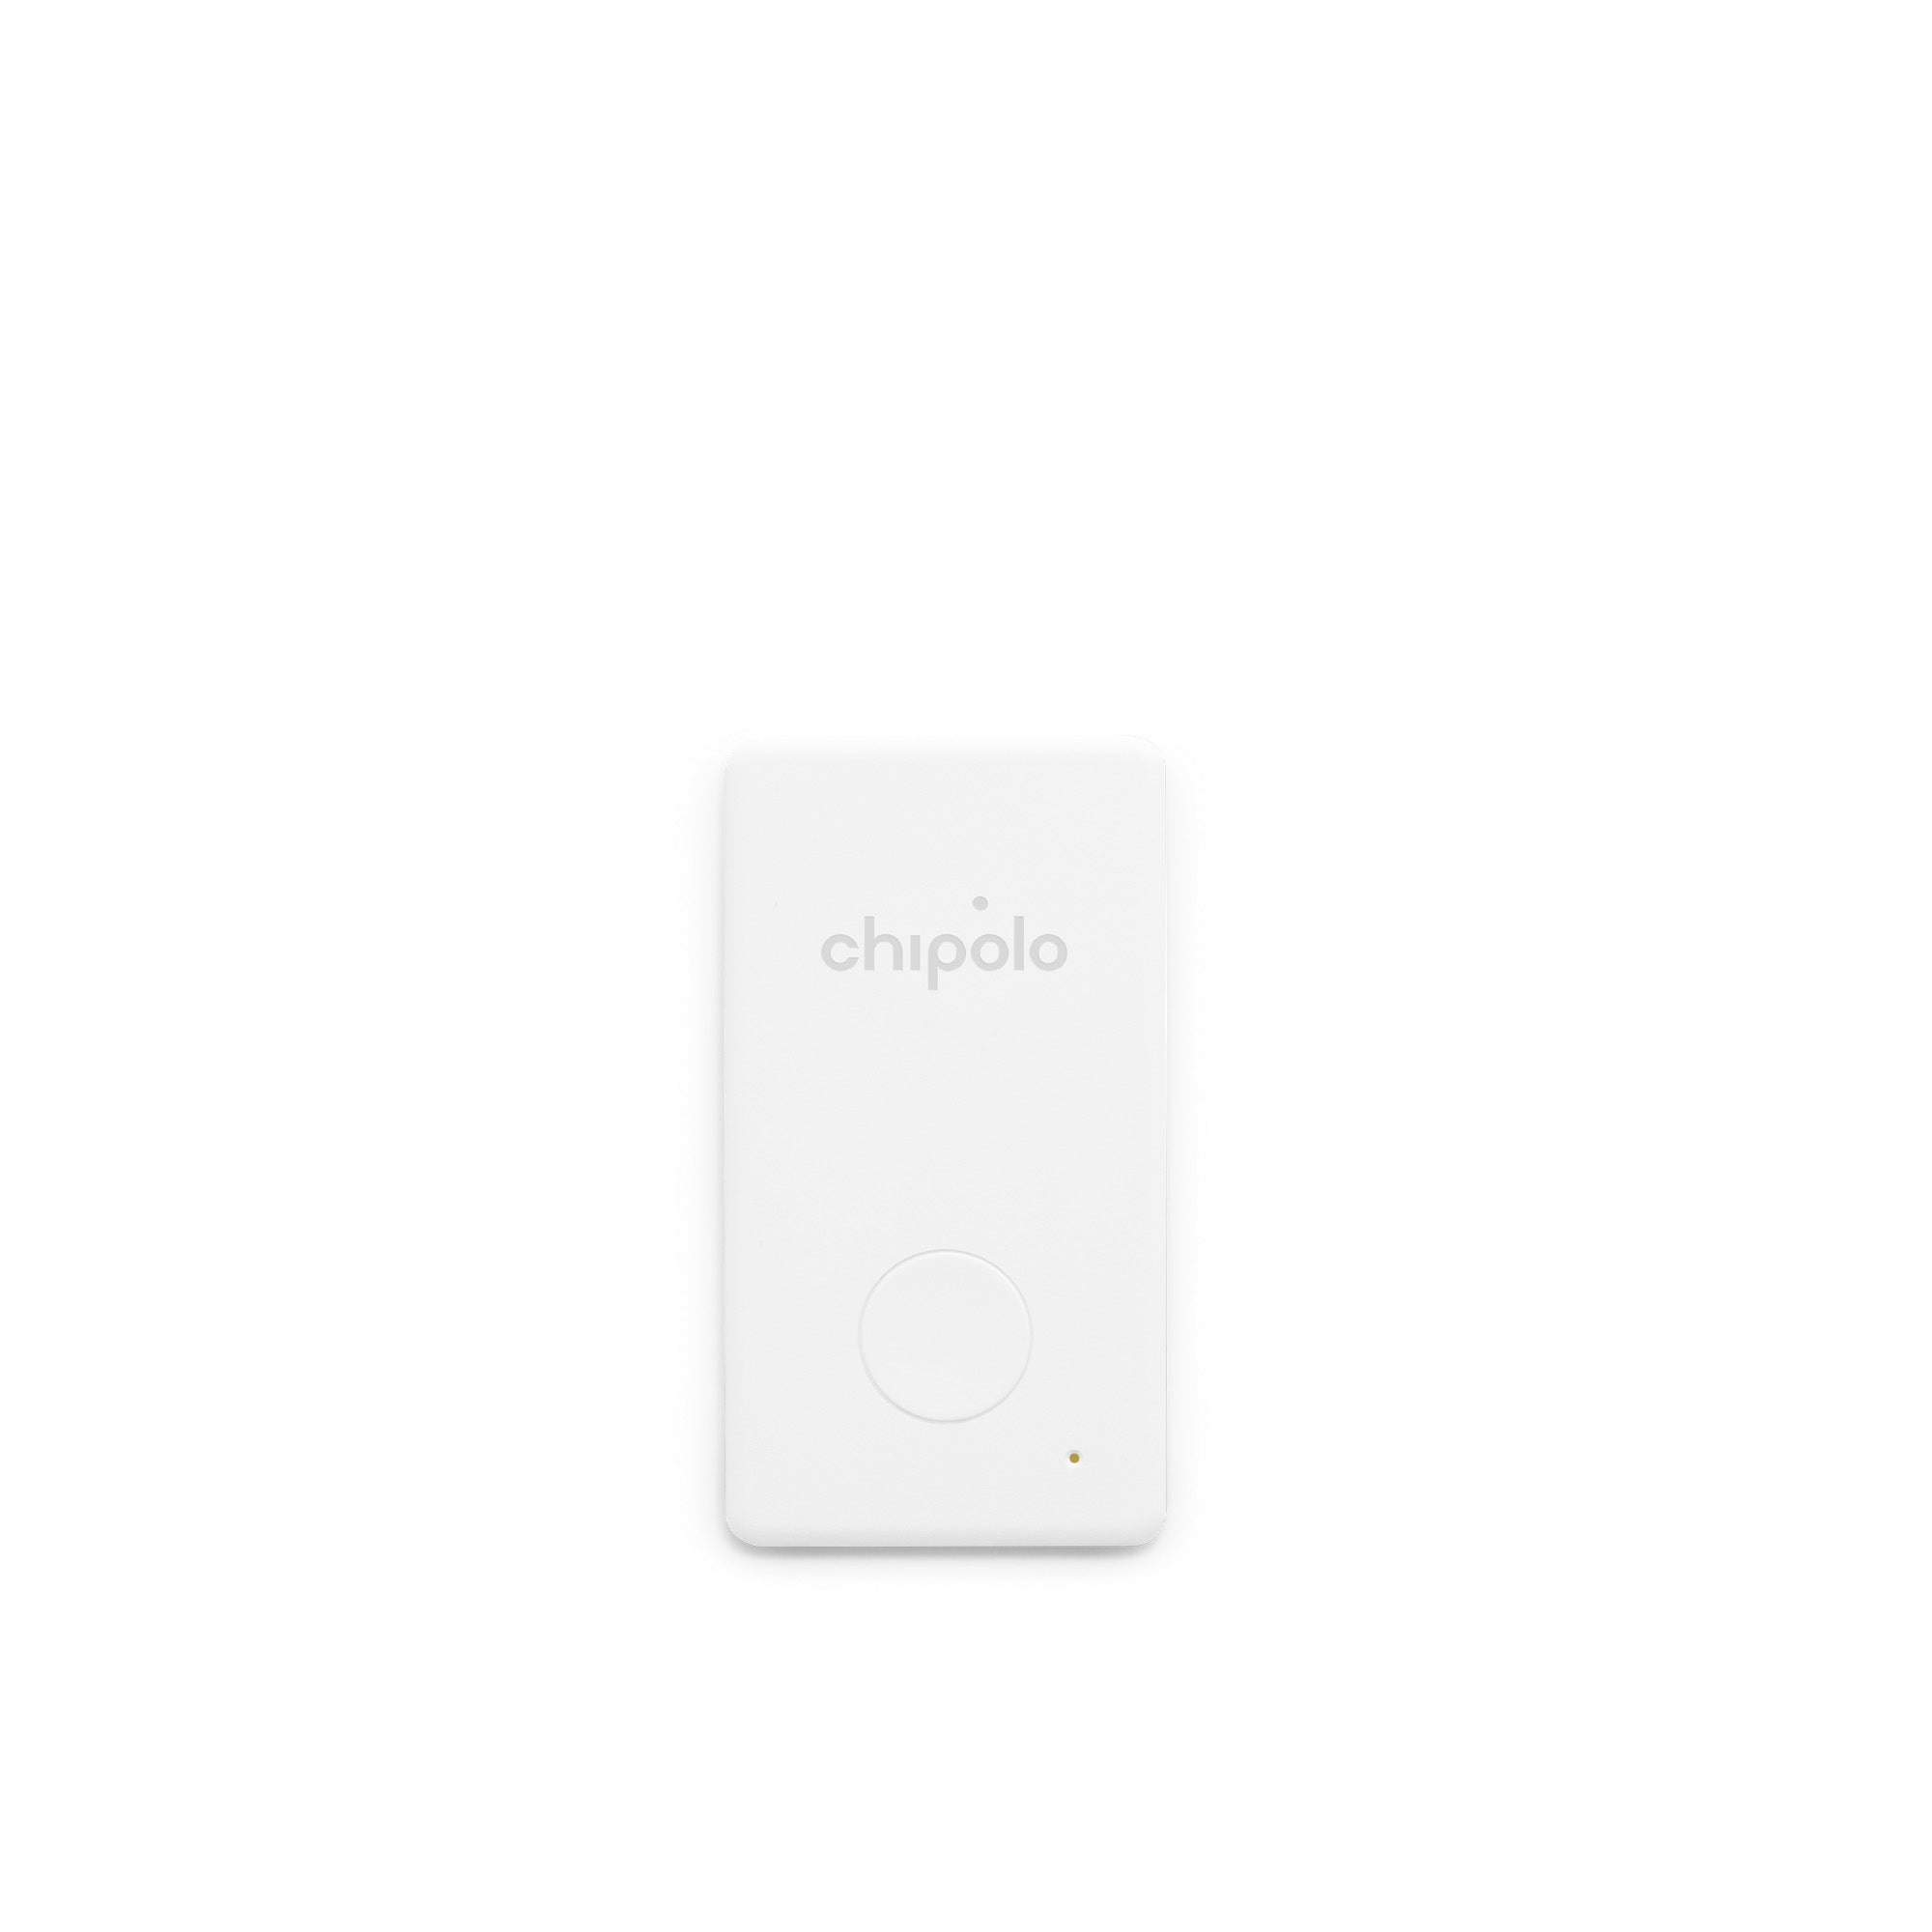 Chipolo Card Spot review: The best way to track your wallet with